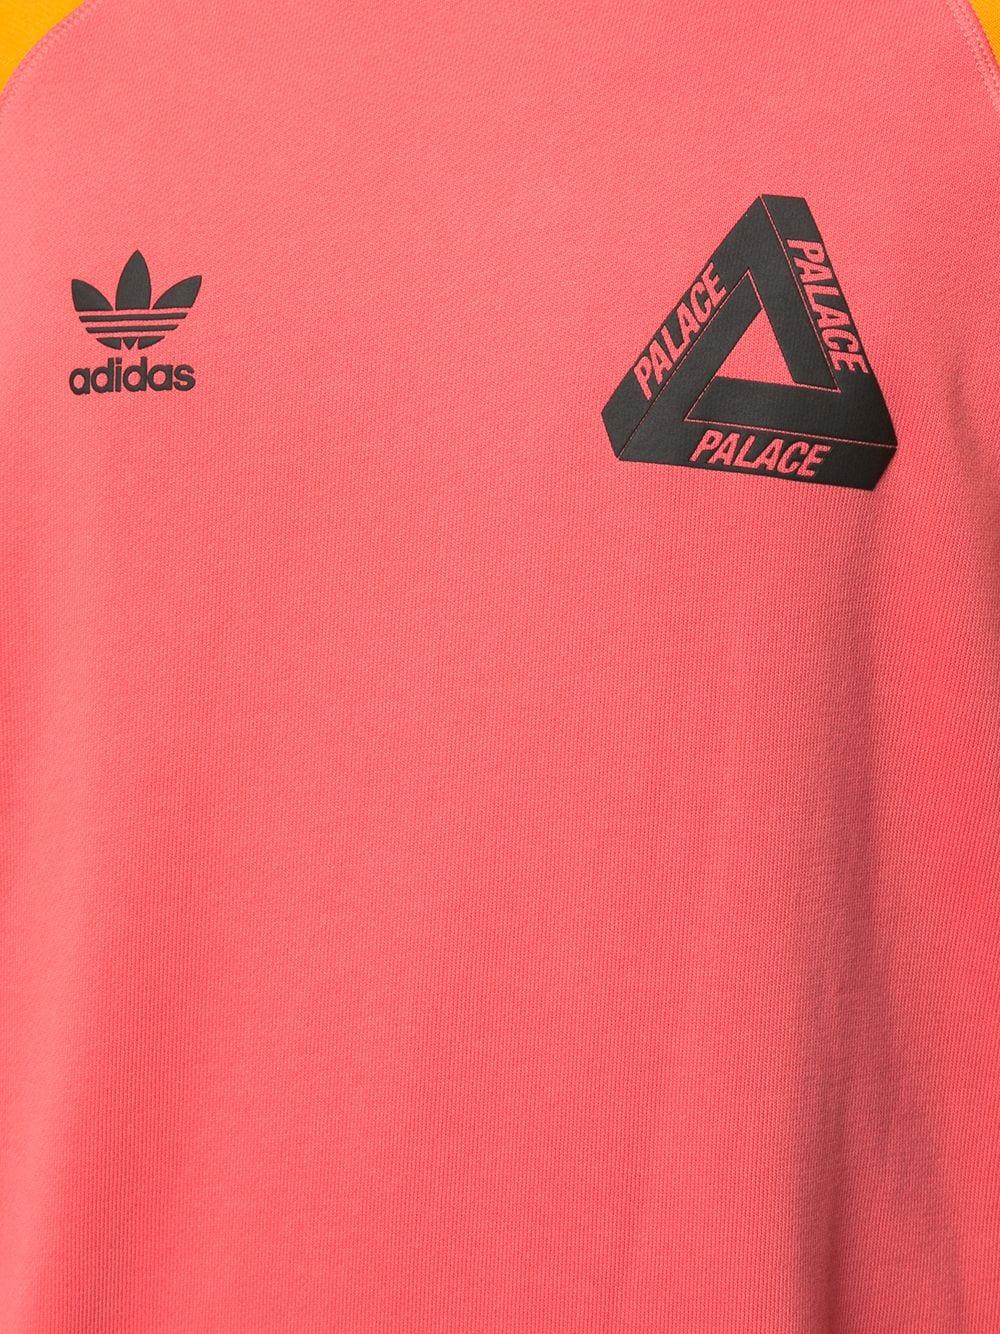 Palace Cotton X Adidas Crew Neck Sweatshirt in Pink for Men | Lyst